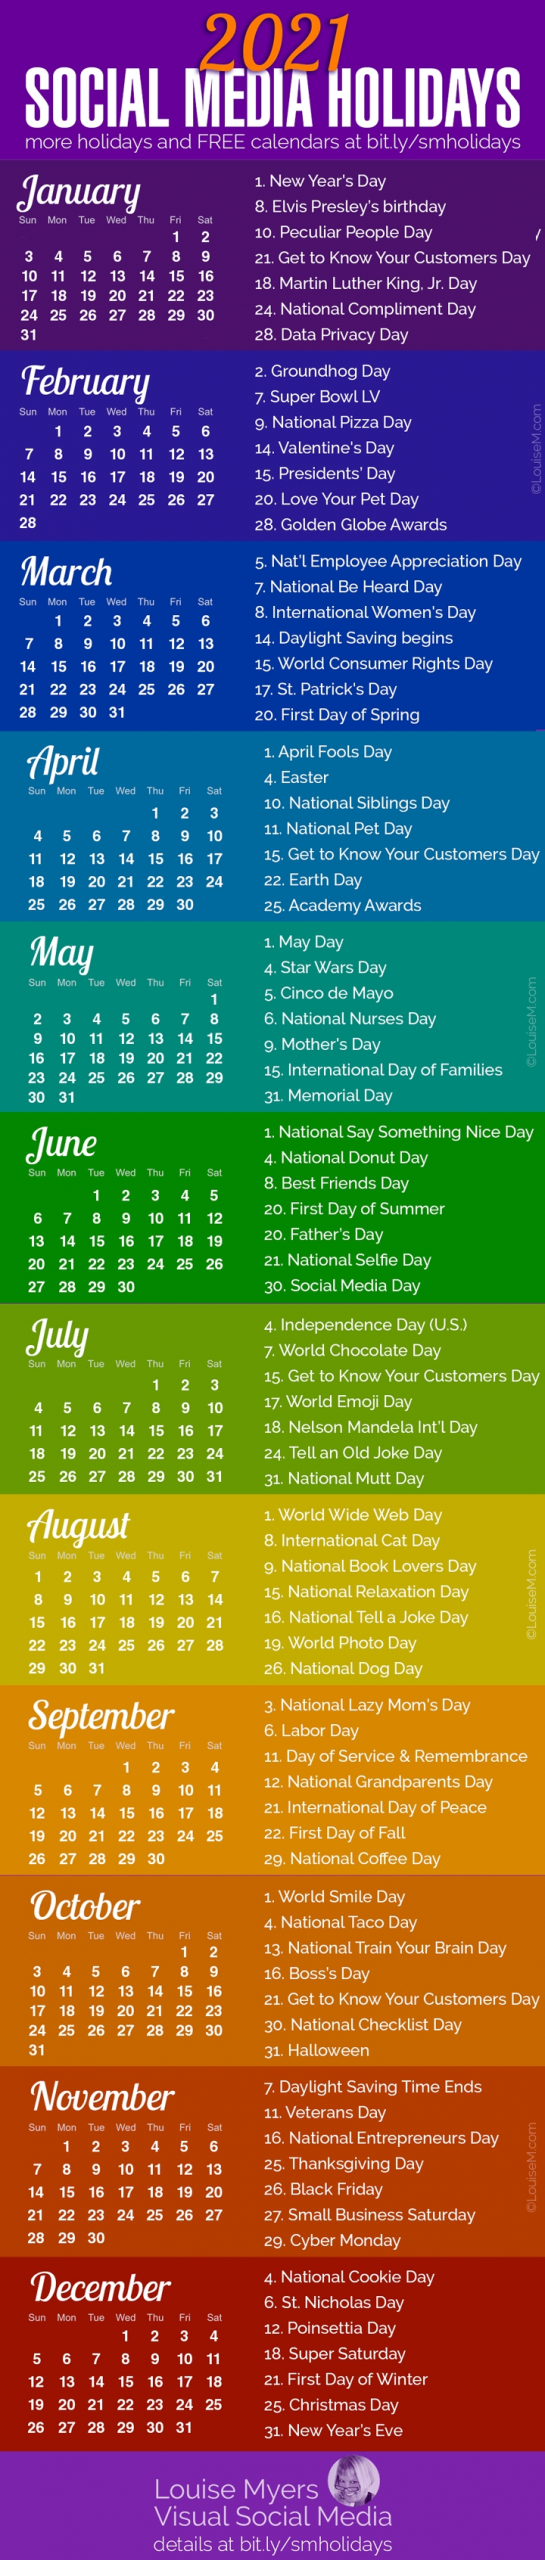 100+ Social Media Holidays You Need In 2020-21: Indispensable!  Printable National Day List 2020